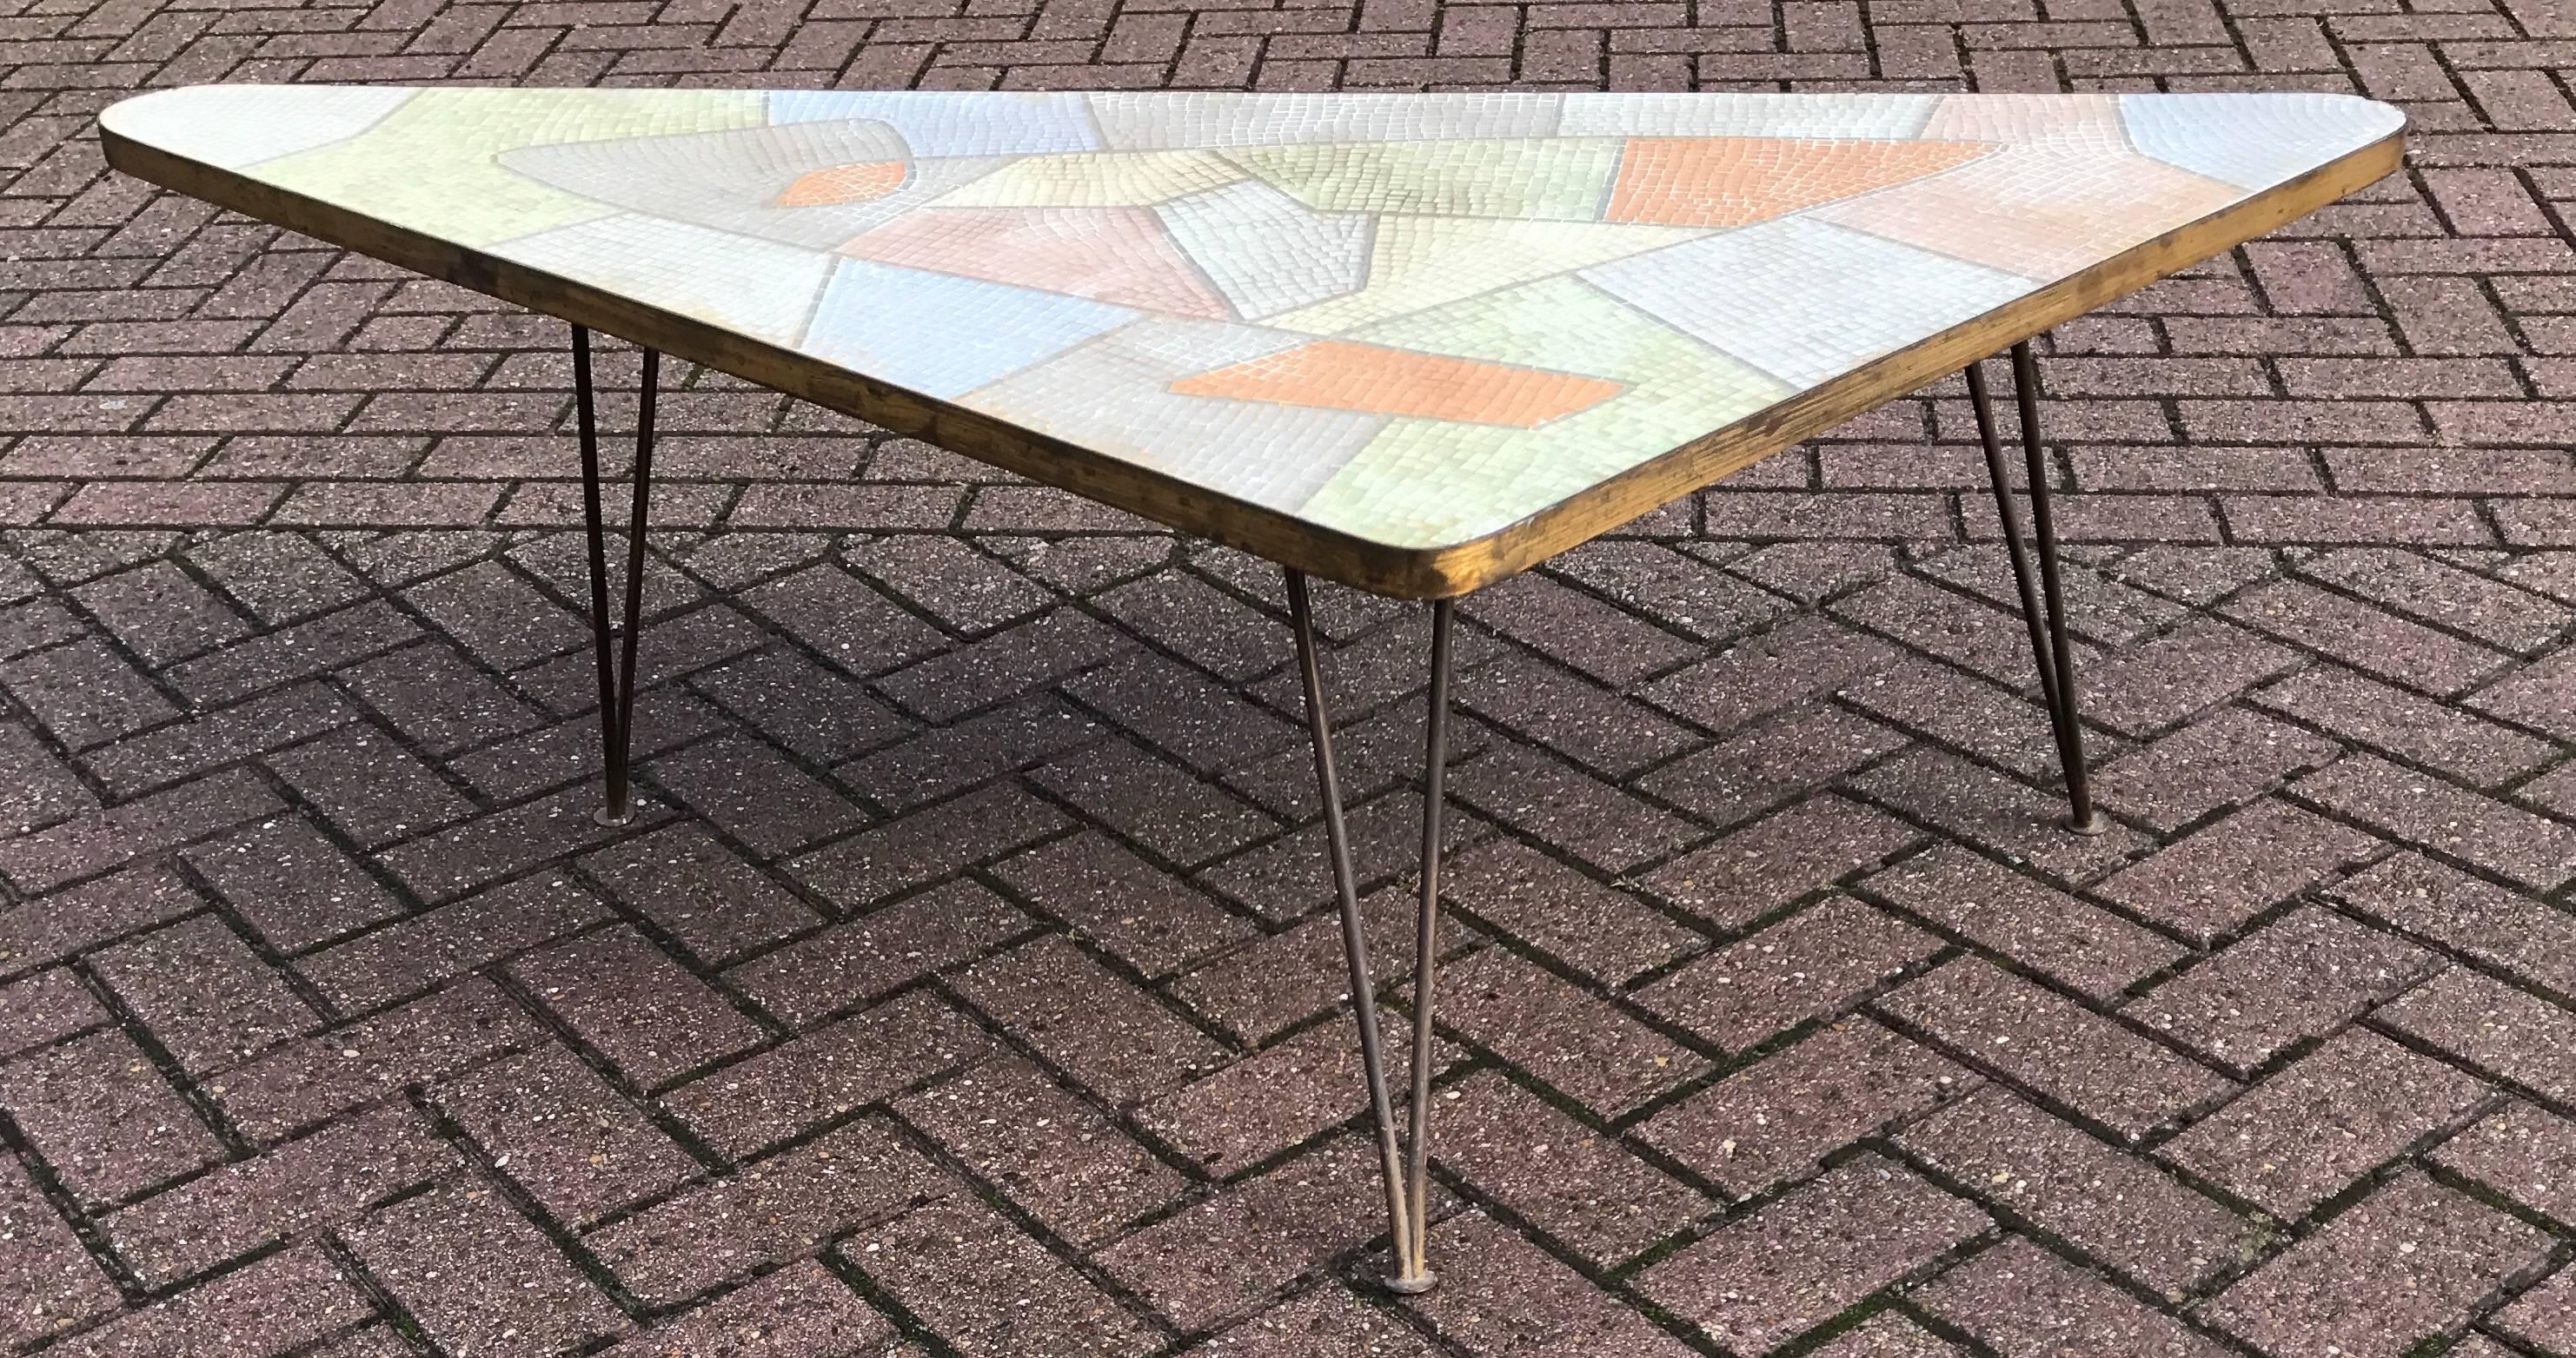 Stunning and all handcrafted 1950s mosaic inlaid table attributed to Berthold Müller.

We attribute this mosaic triangle tripod coffee table to German sculptor Berthold Müller of Oerlinghausen (1893-1979). The table has a fantastic, organic shaped